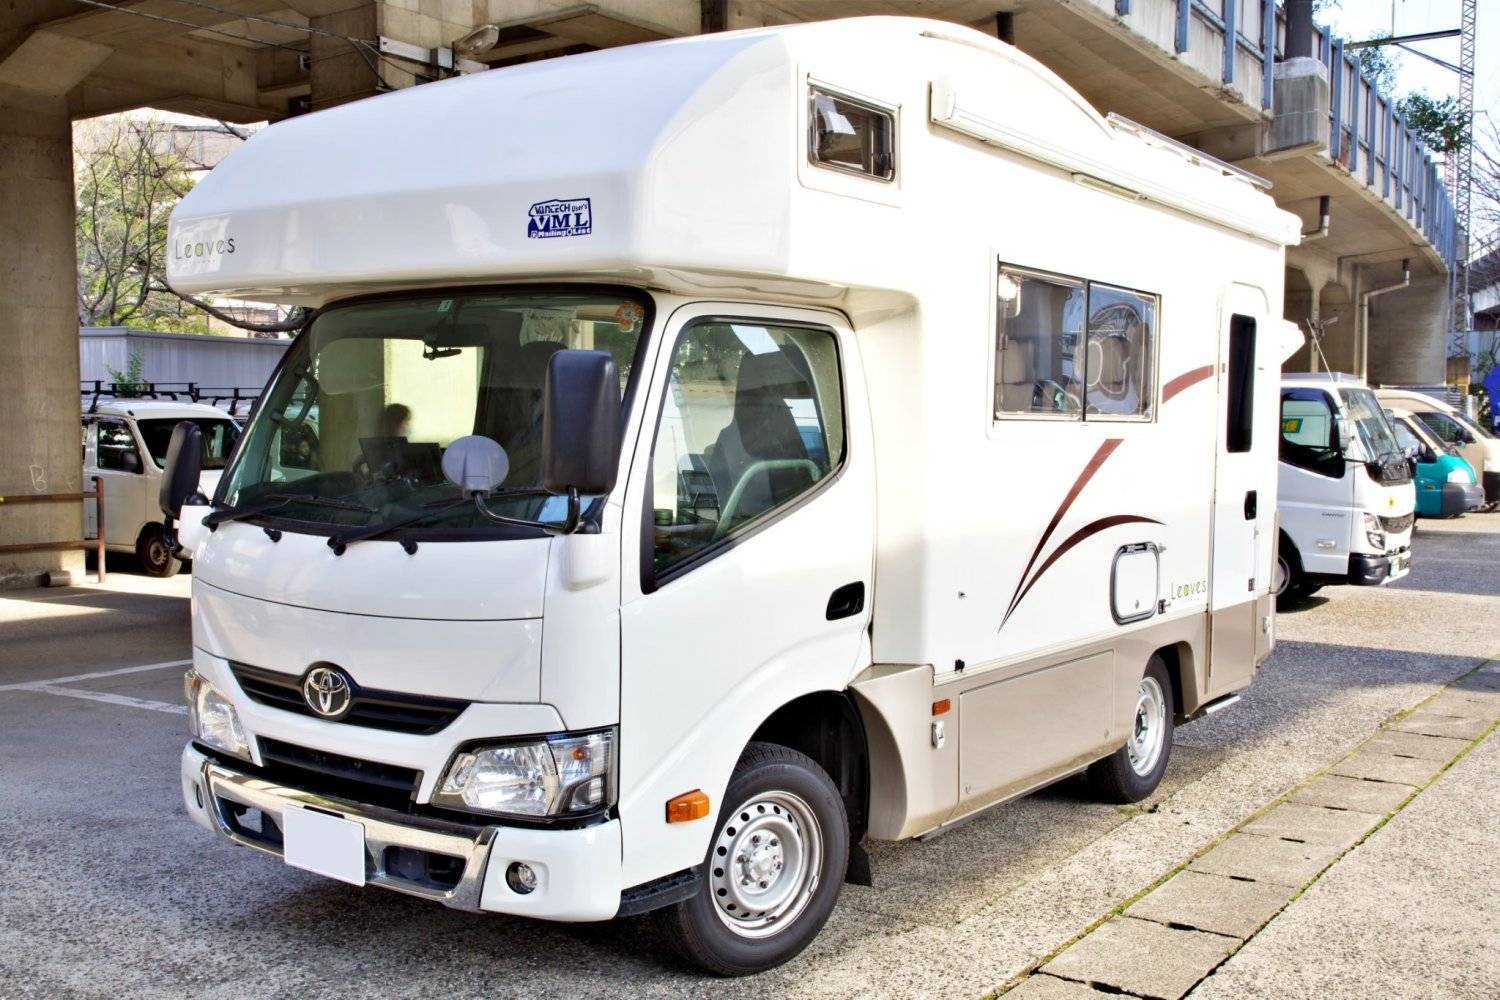 Young's Holidays 【Tokyo】Japan 6ppl RV Caravan 24 hours Rental Experience(JTMS2) 12